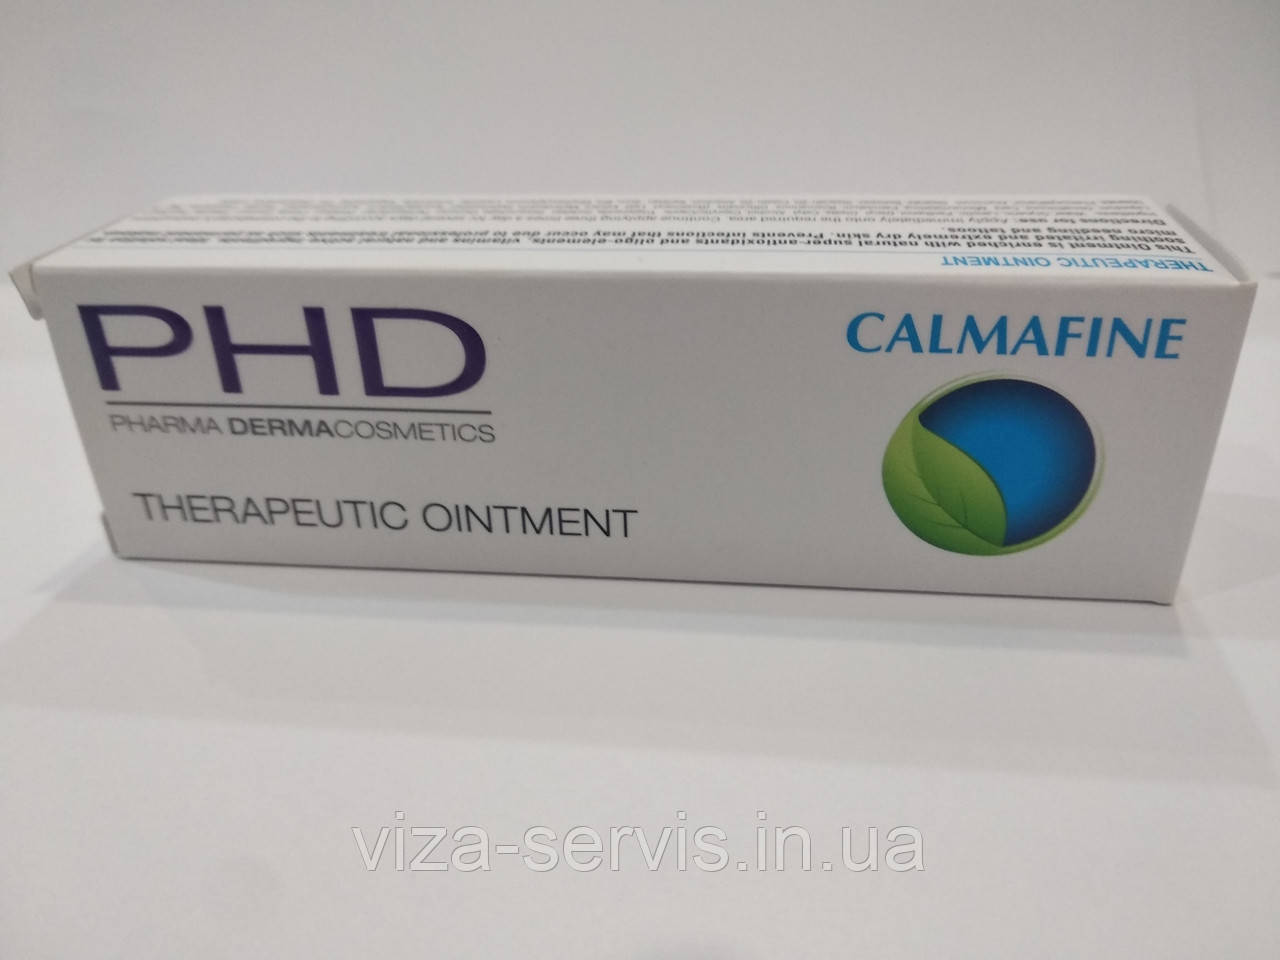 CALMAFINE THERAPEUTIC OINTMENT Дерматологічна мазь